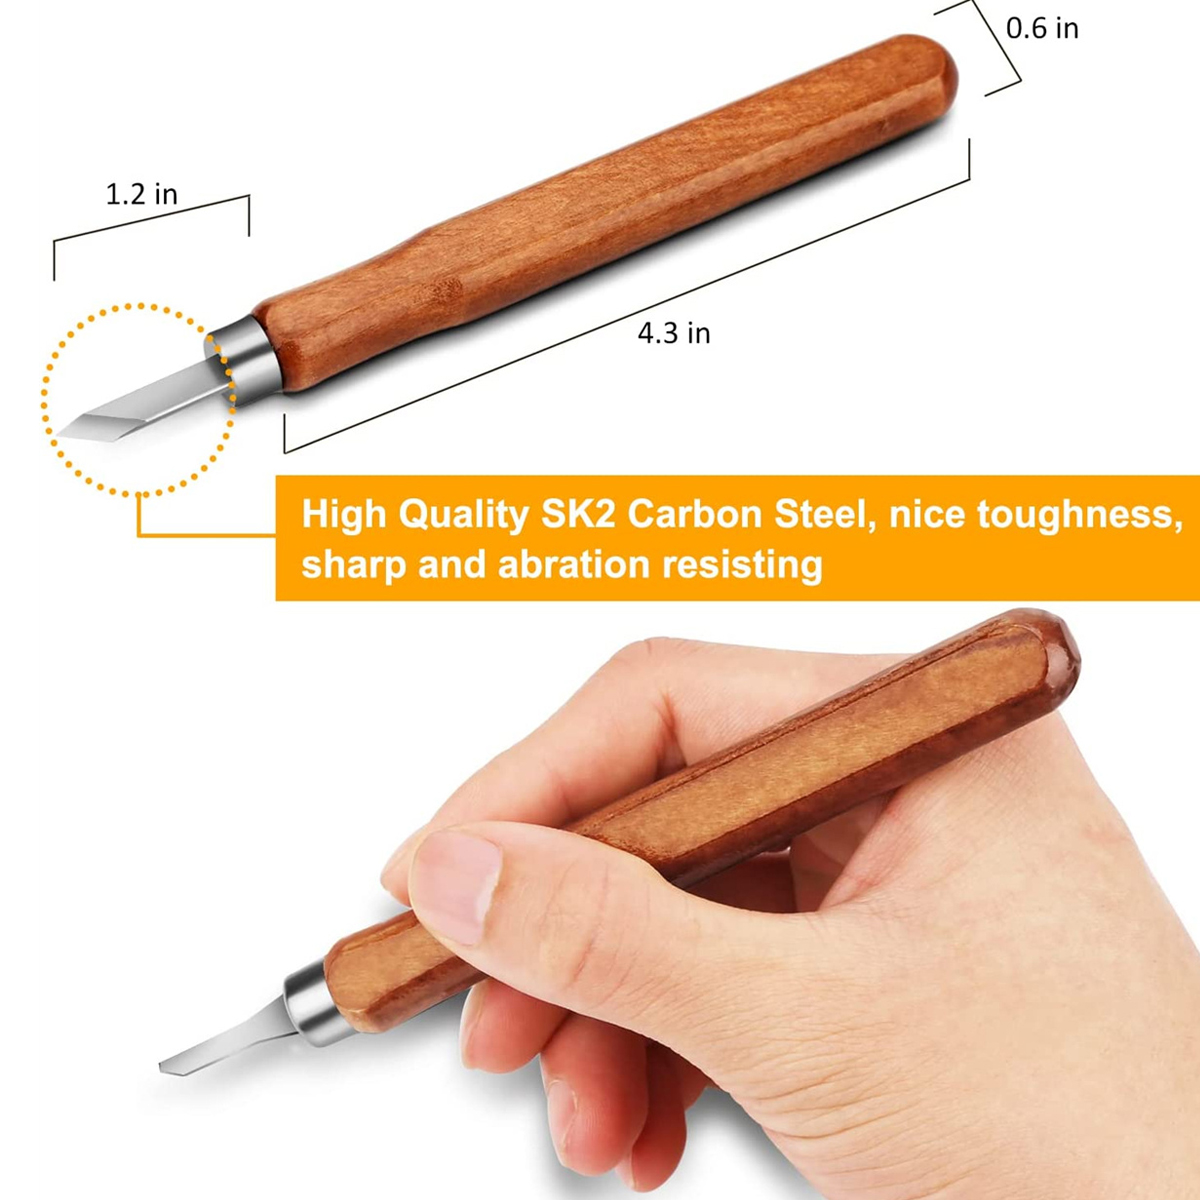 SK2 Carbon Steel 12-Piece Wood Carving Knife Set with Ergonomic Handles Ideal for Sculpting Whittling Crafts Beginners & Professional Woodworkers - All-in-one Kit in a Portable Canvas Bag